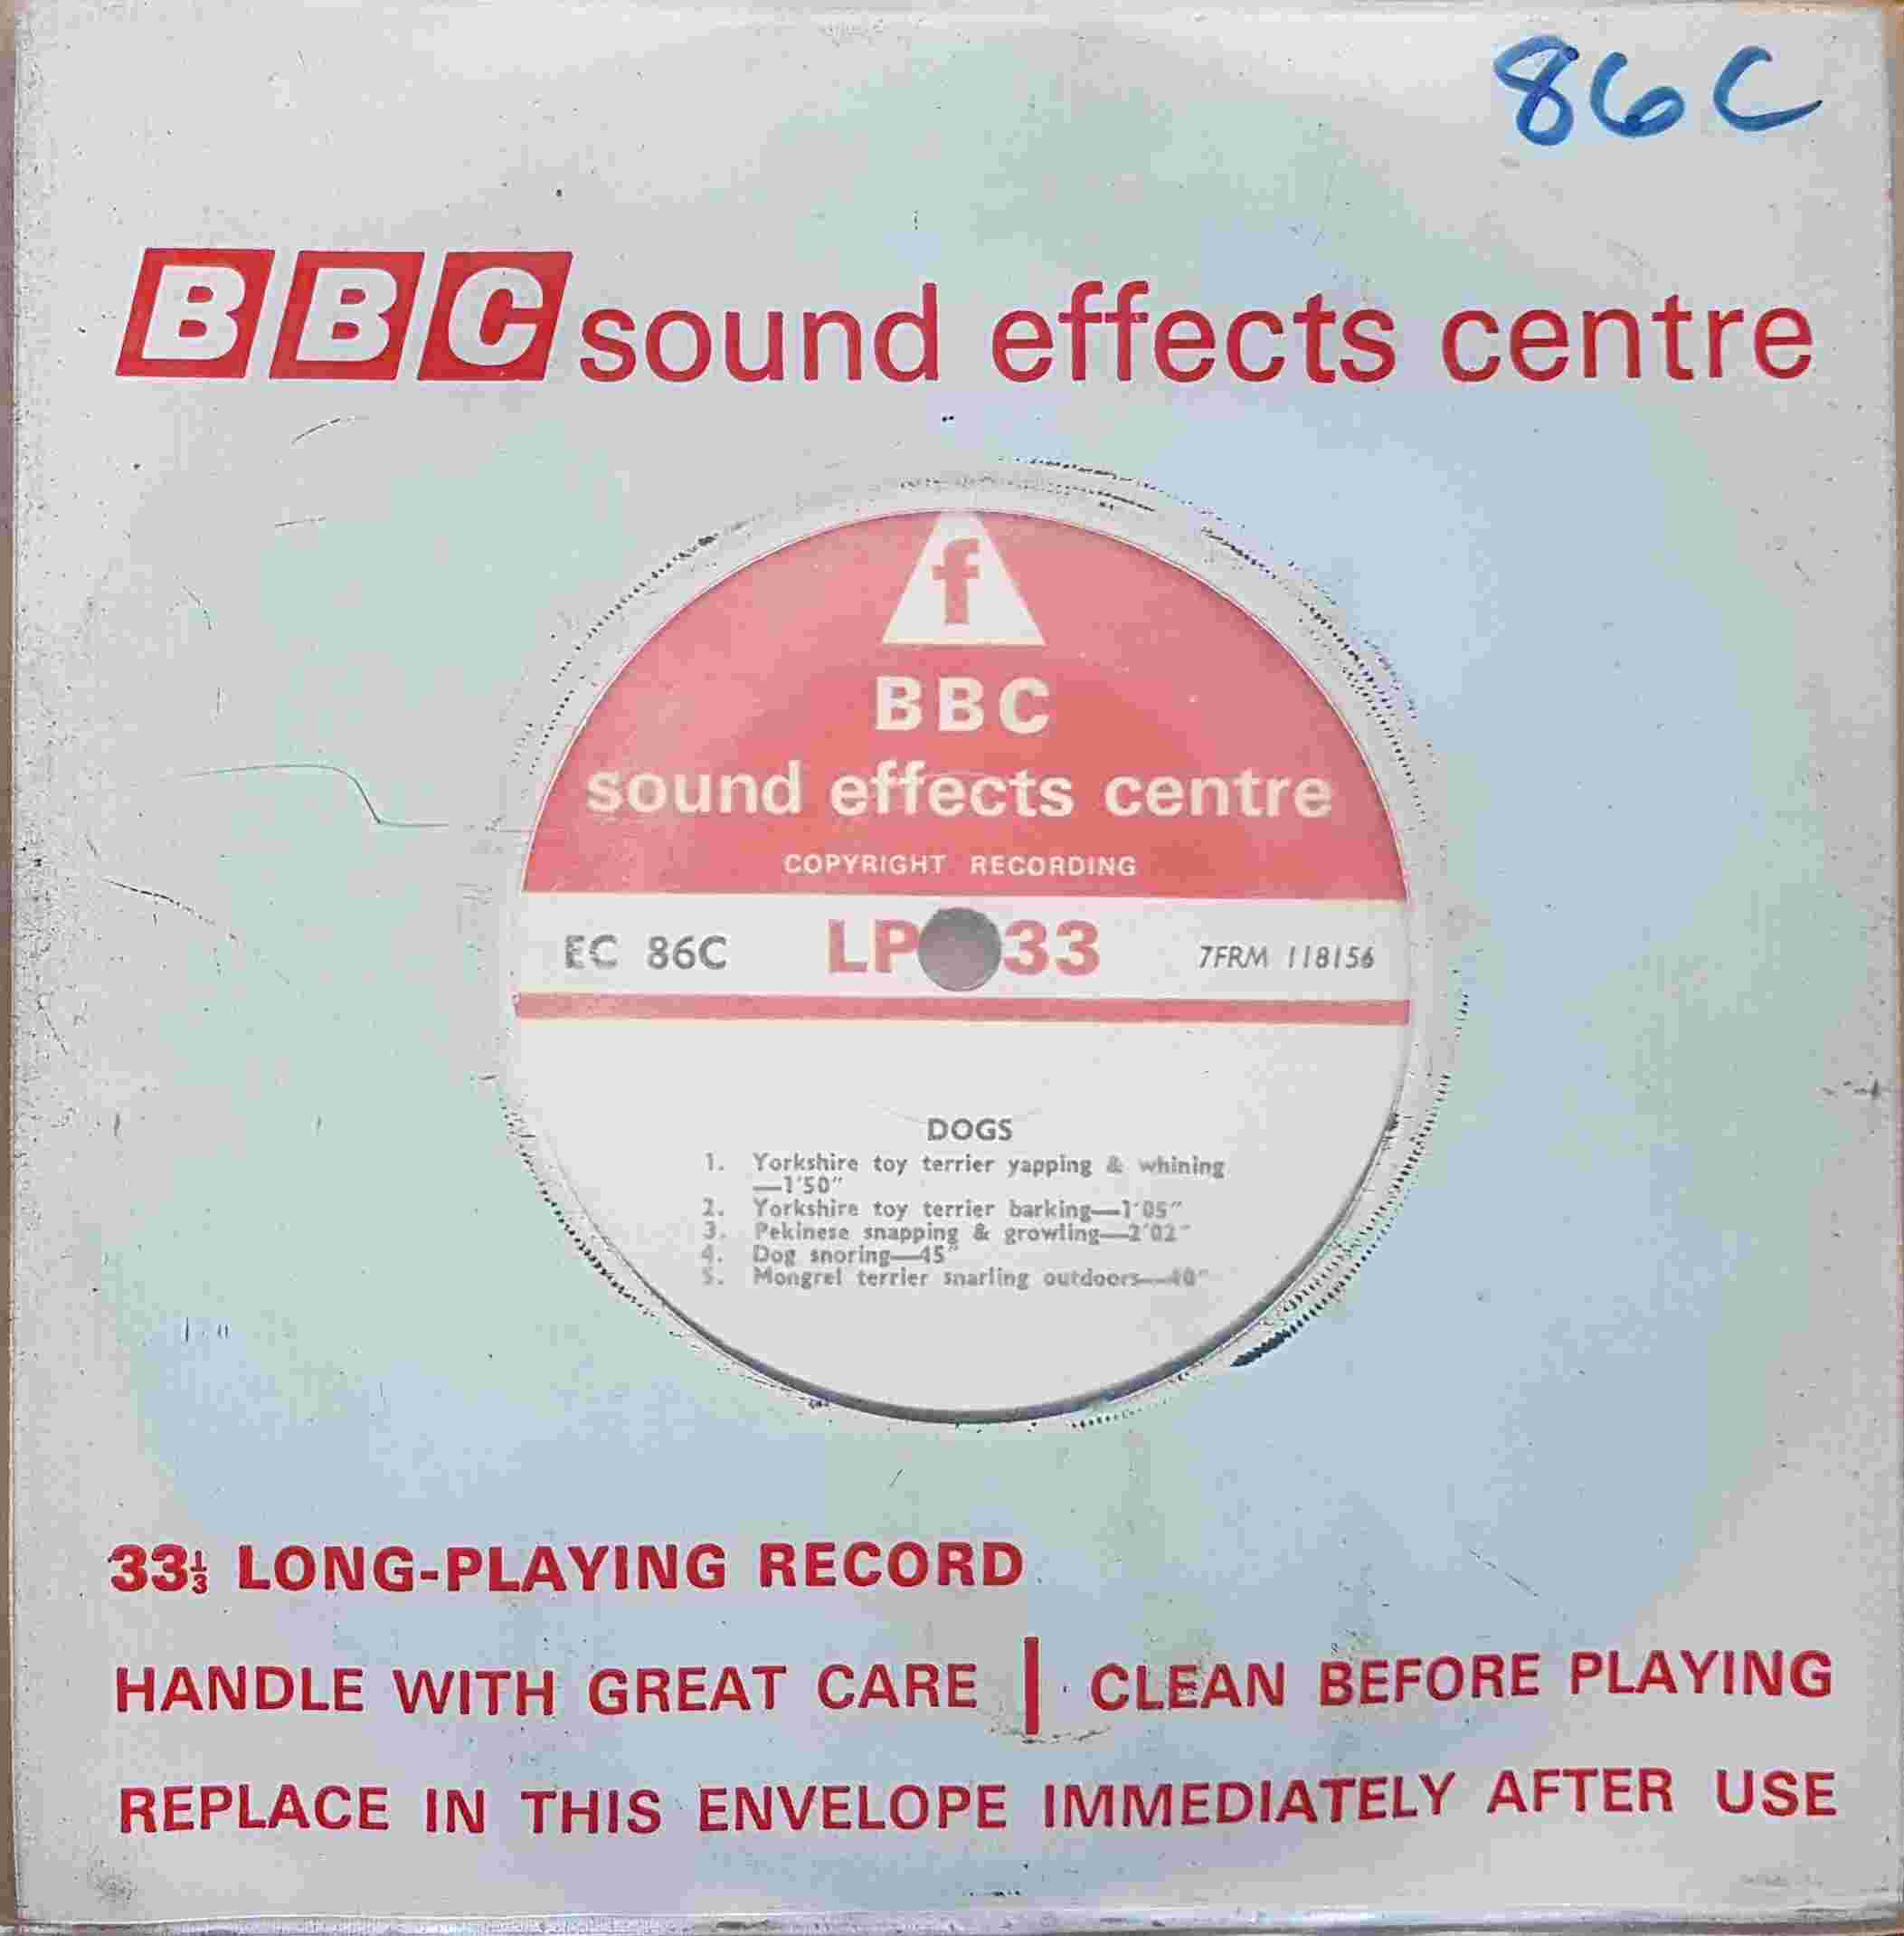 Picture of EC 86C Dogs by artist Not registered from the BBC singles - Records and Tapes library